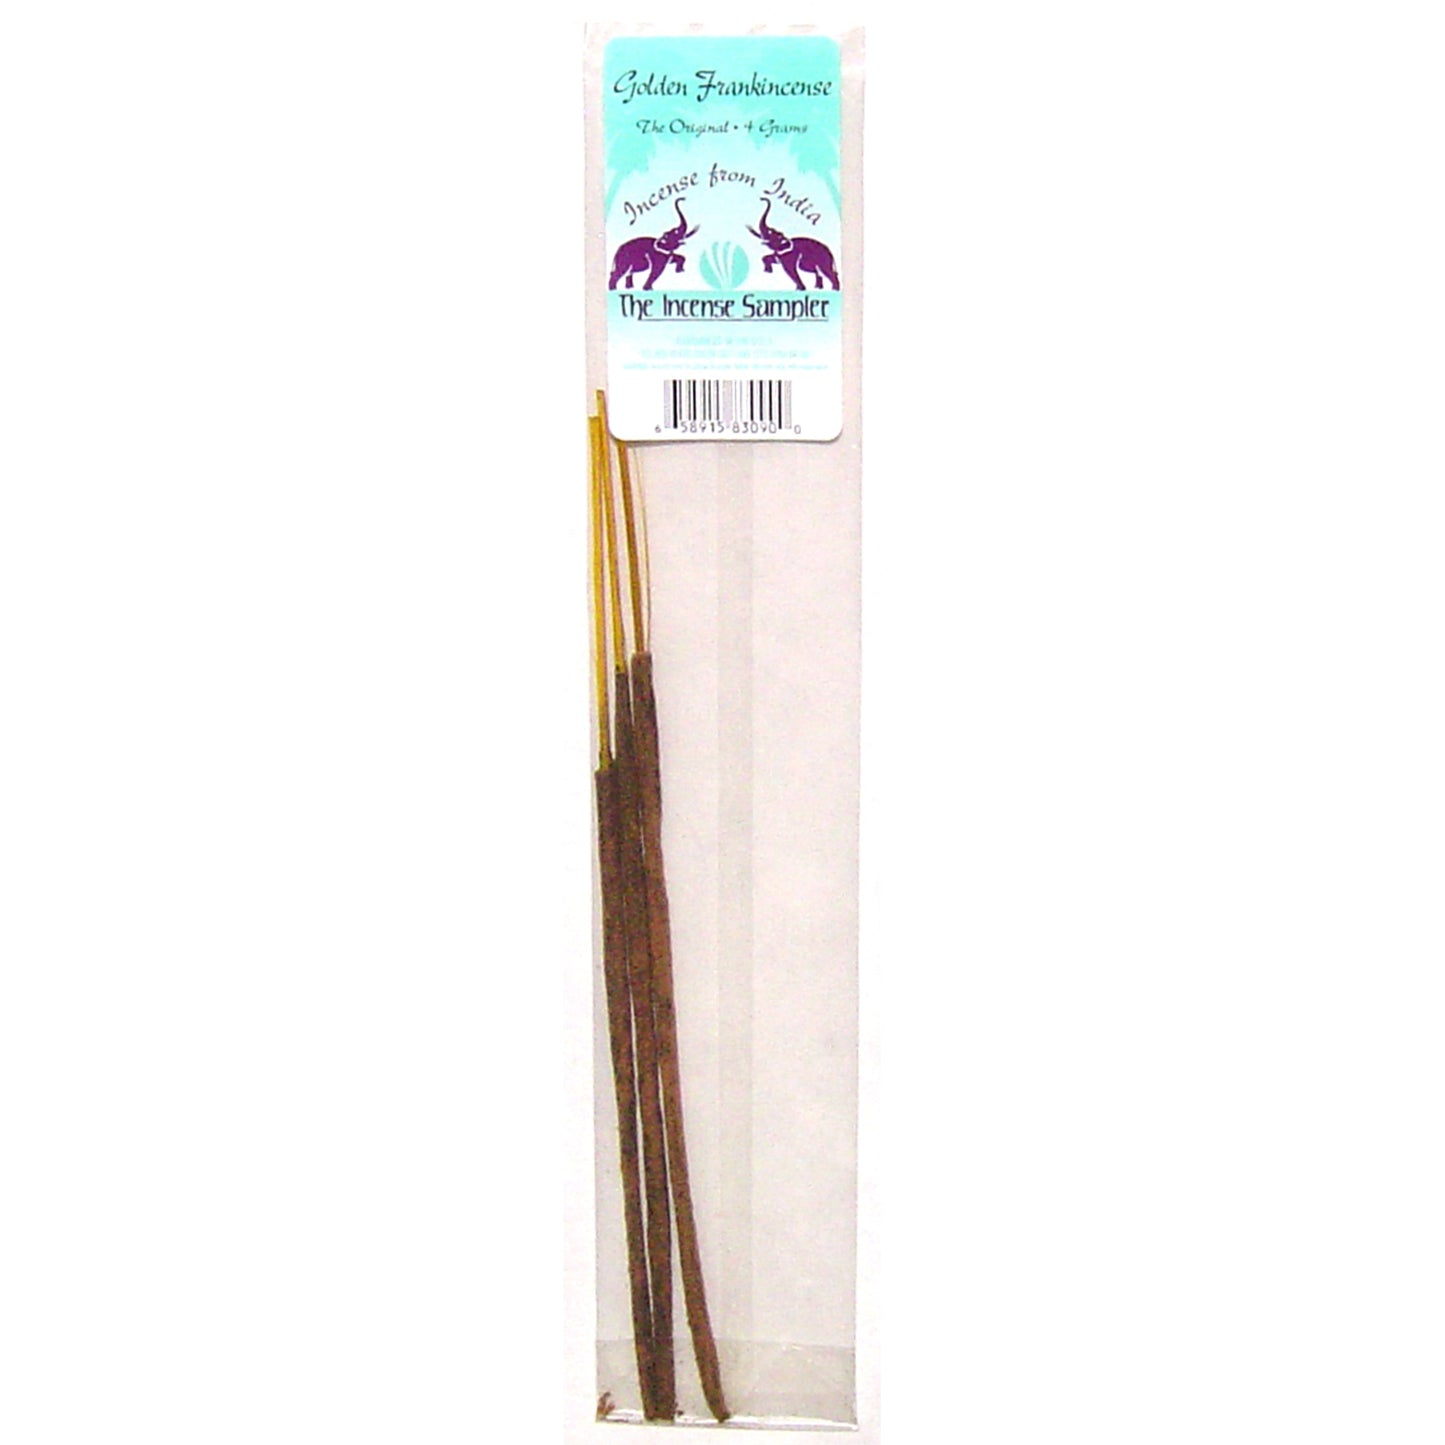 Incense From India - Golden Frankincense